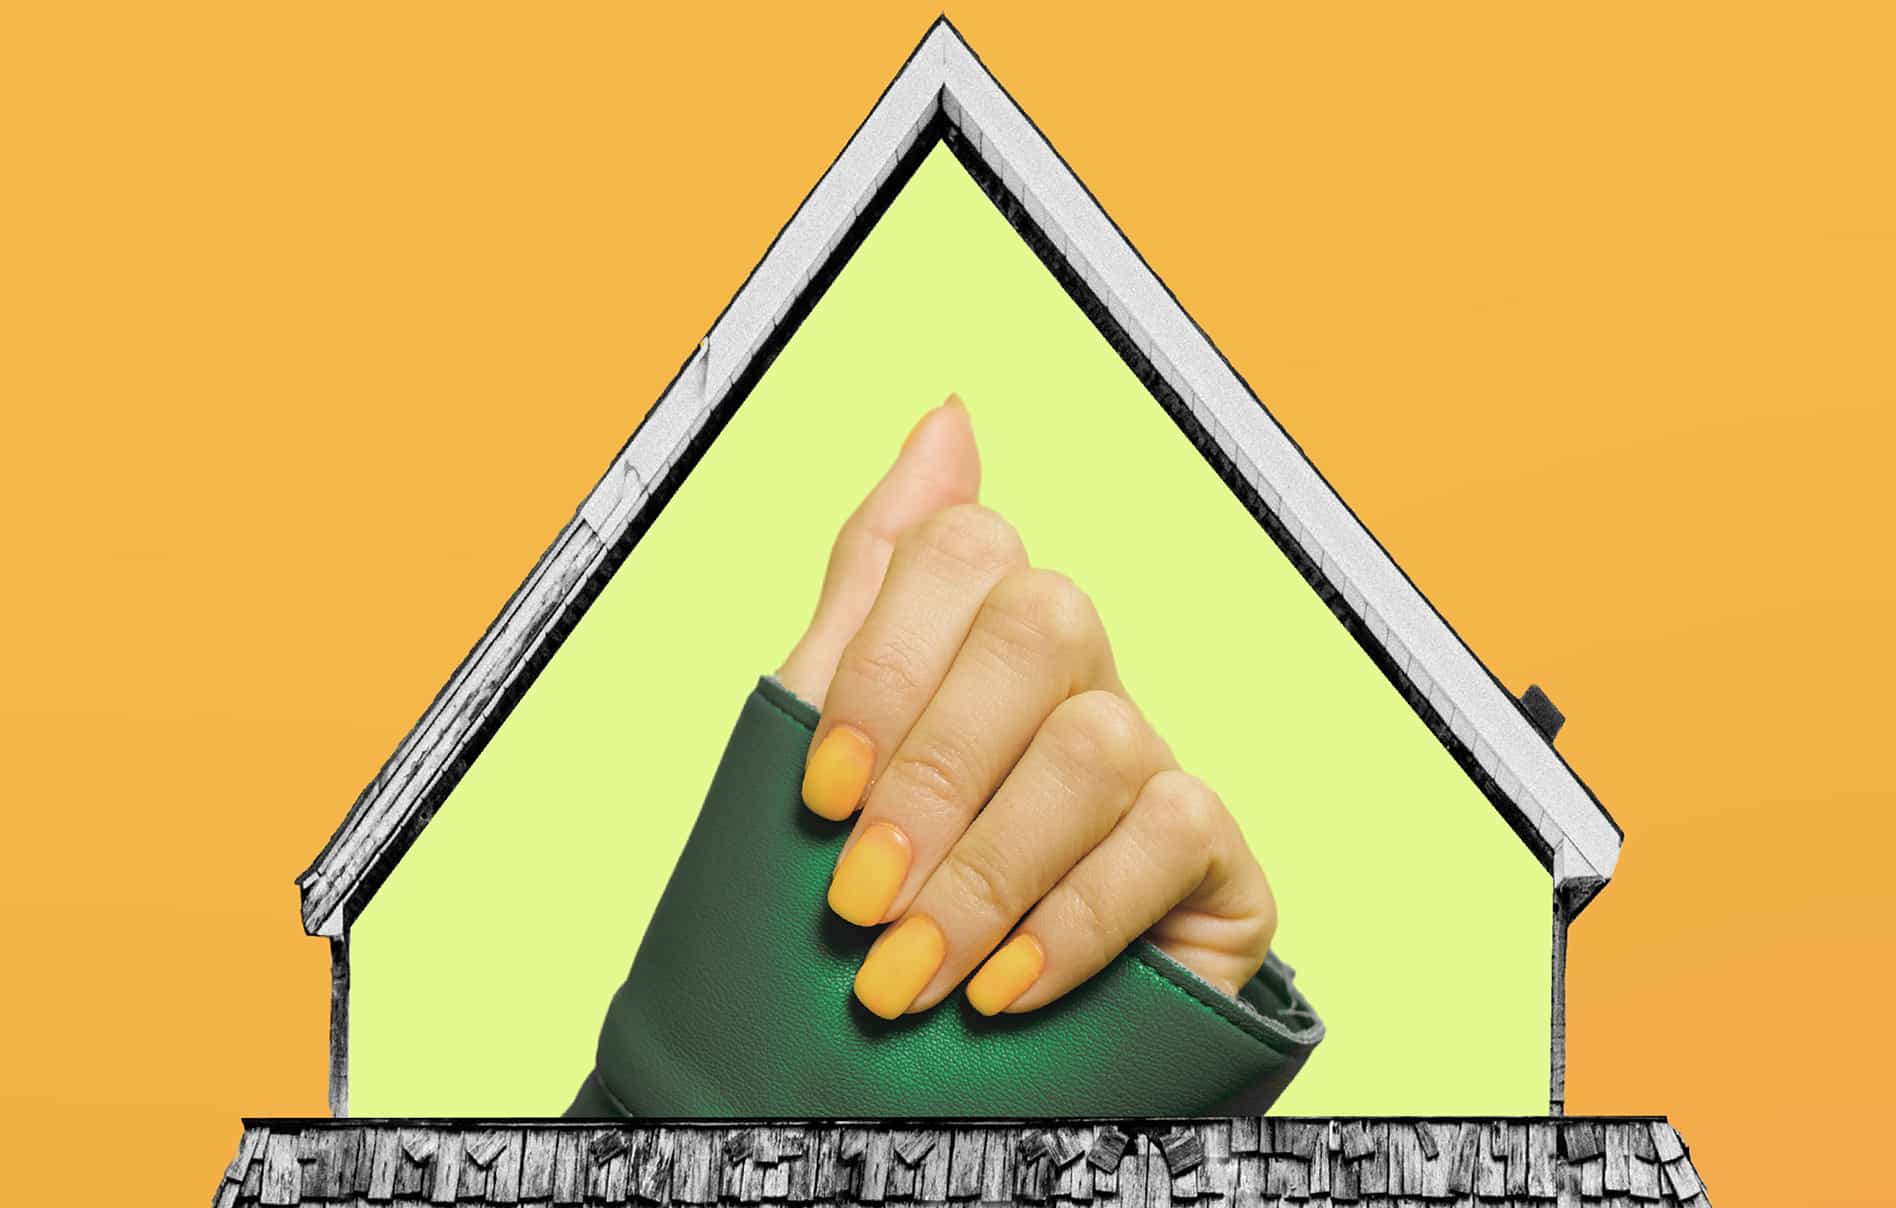 A house roof covering a hand displaying a manicure